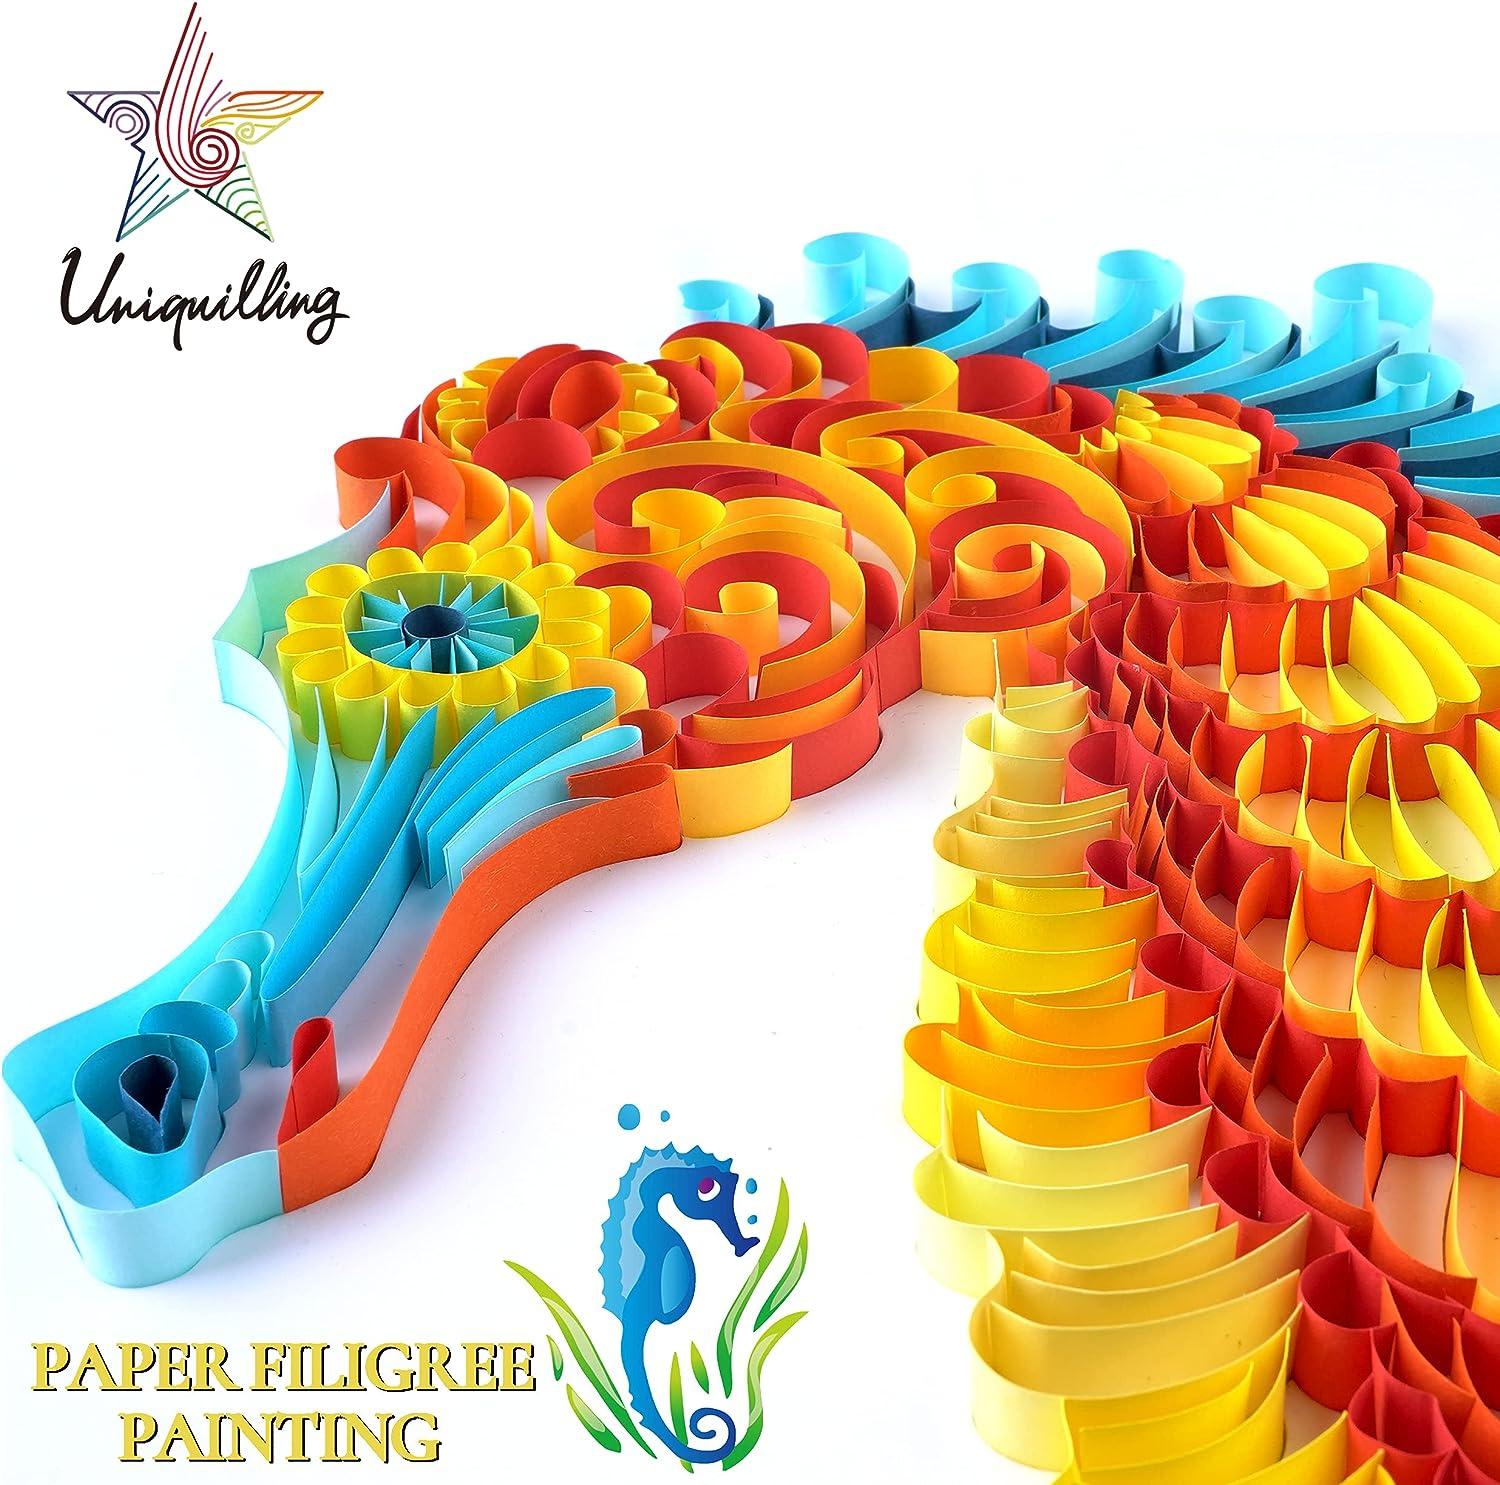 Uniquilling Quilling Kits Paper Quilling Kit for Adults Beginner, DIY Kits  for Adults Paper Filigree Painting Kits Paper Quilling Tools, 16 * 20in